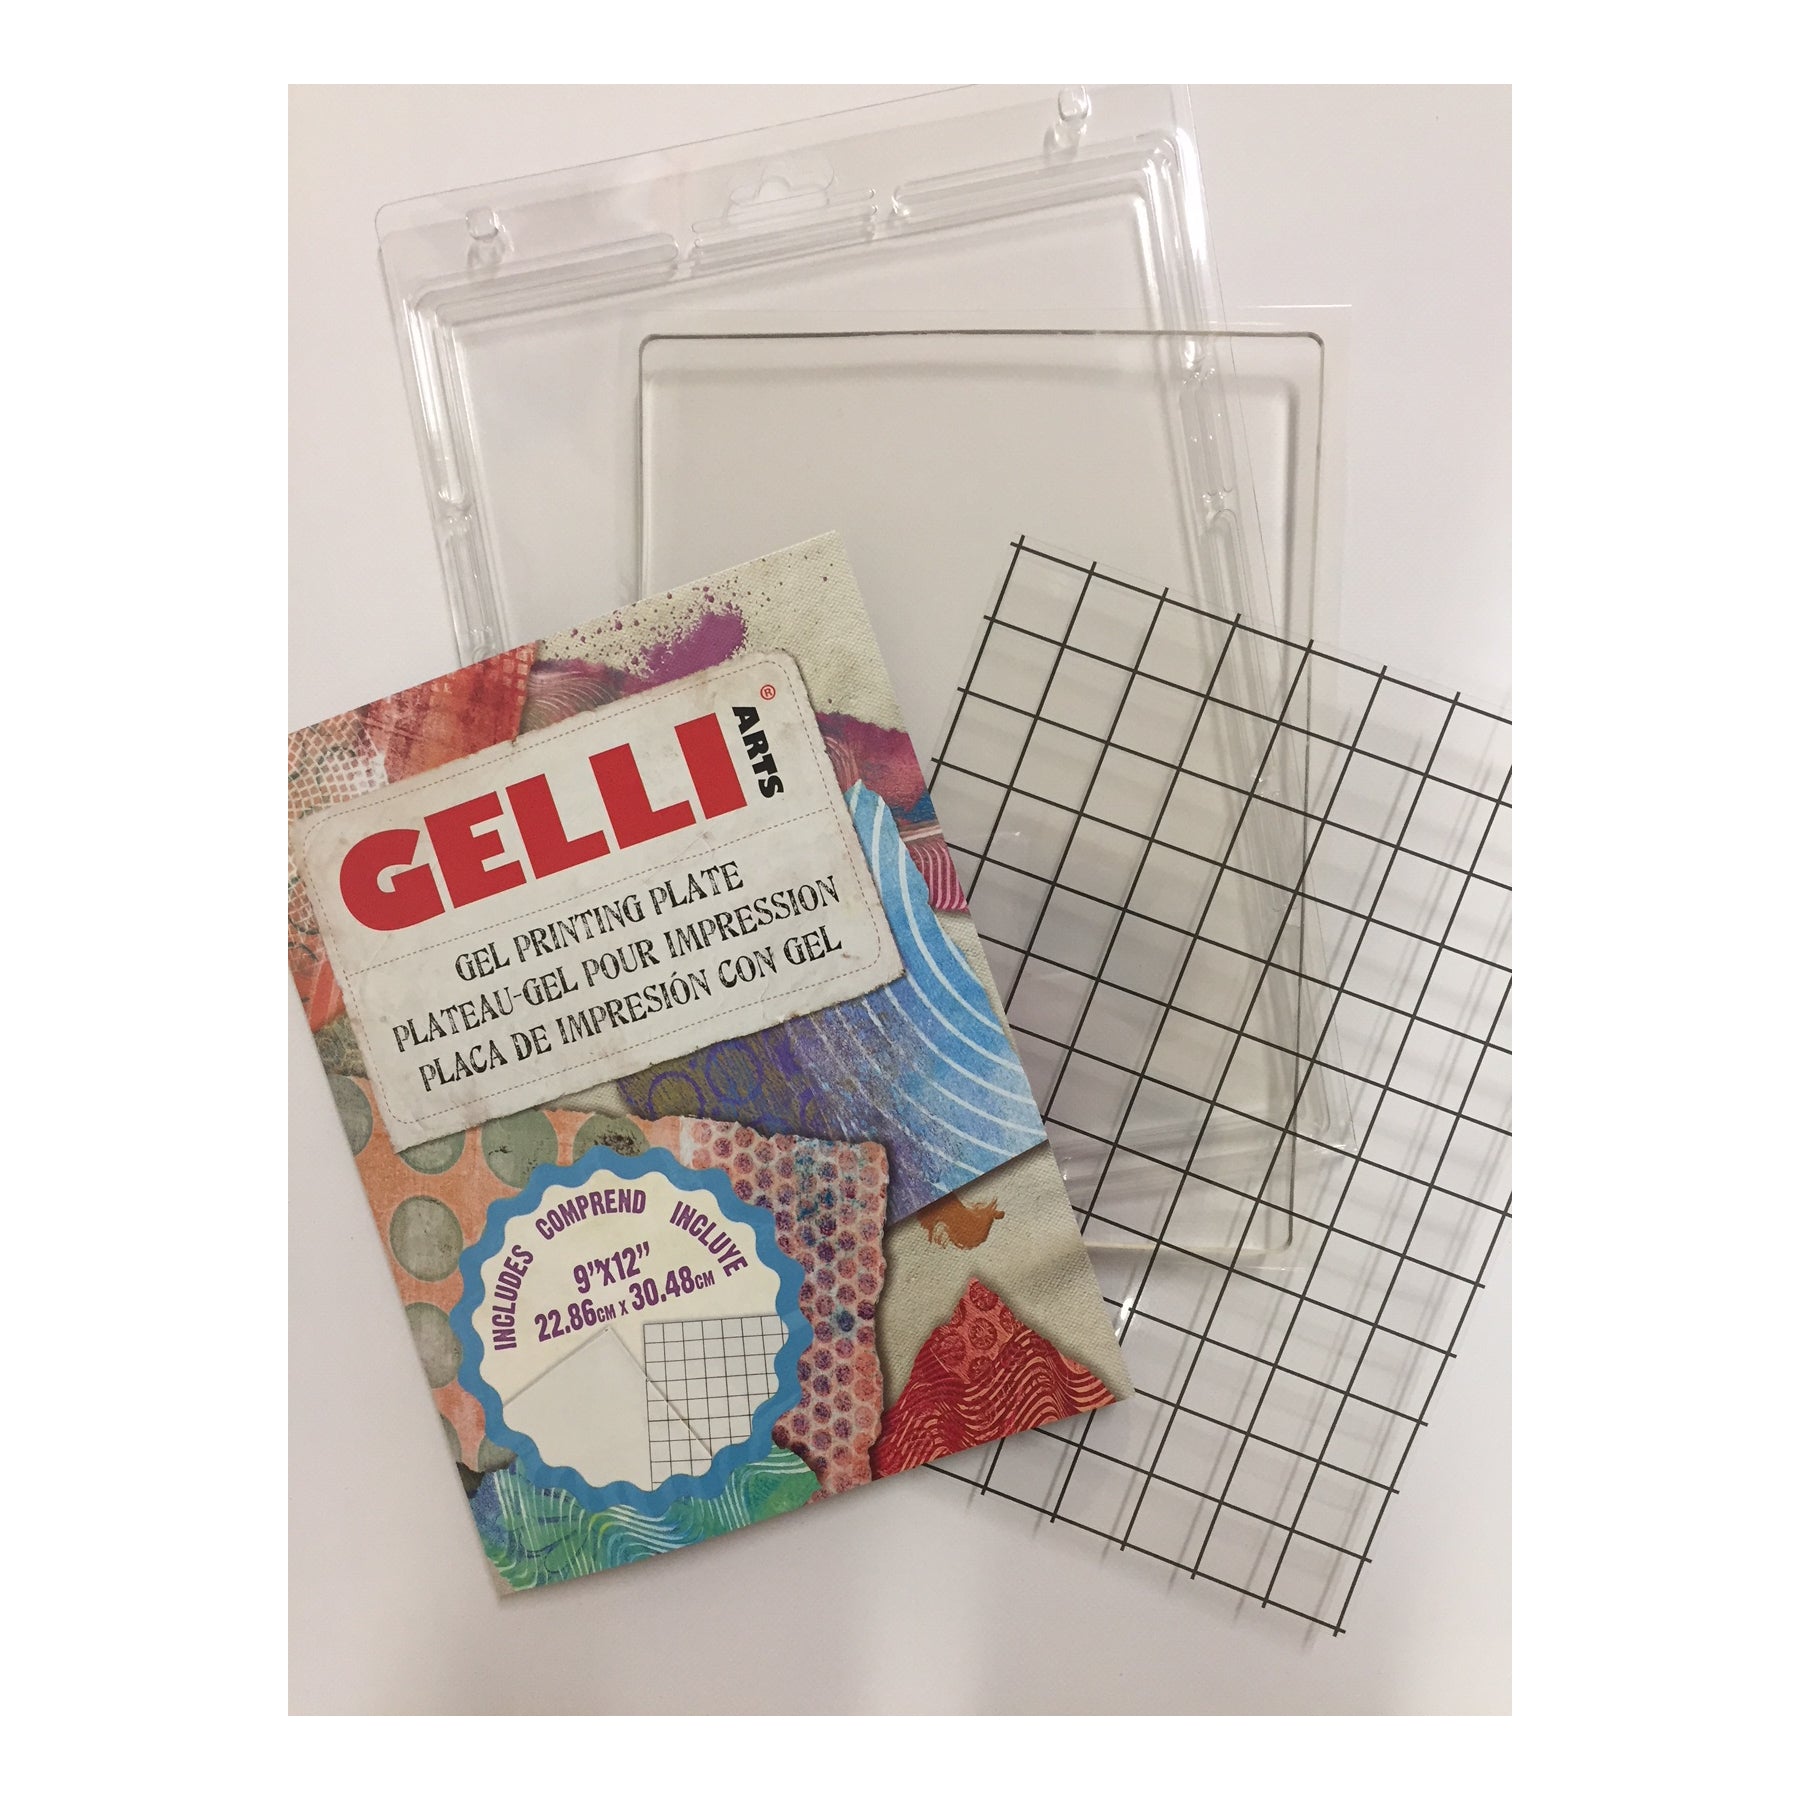 Gelli Arts Gel Printing Plate - 5 X 7 Gel Plate, Reusable Gel Printing  Plate, Printmaking Gelli Plate for Art, Clear Gel Monoprinting Plate, Gel  Plate Printing for Arts and Crafts 